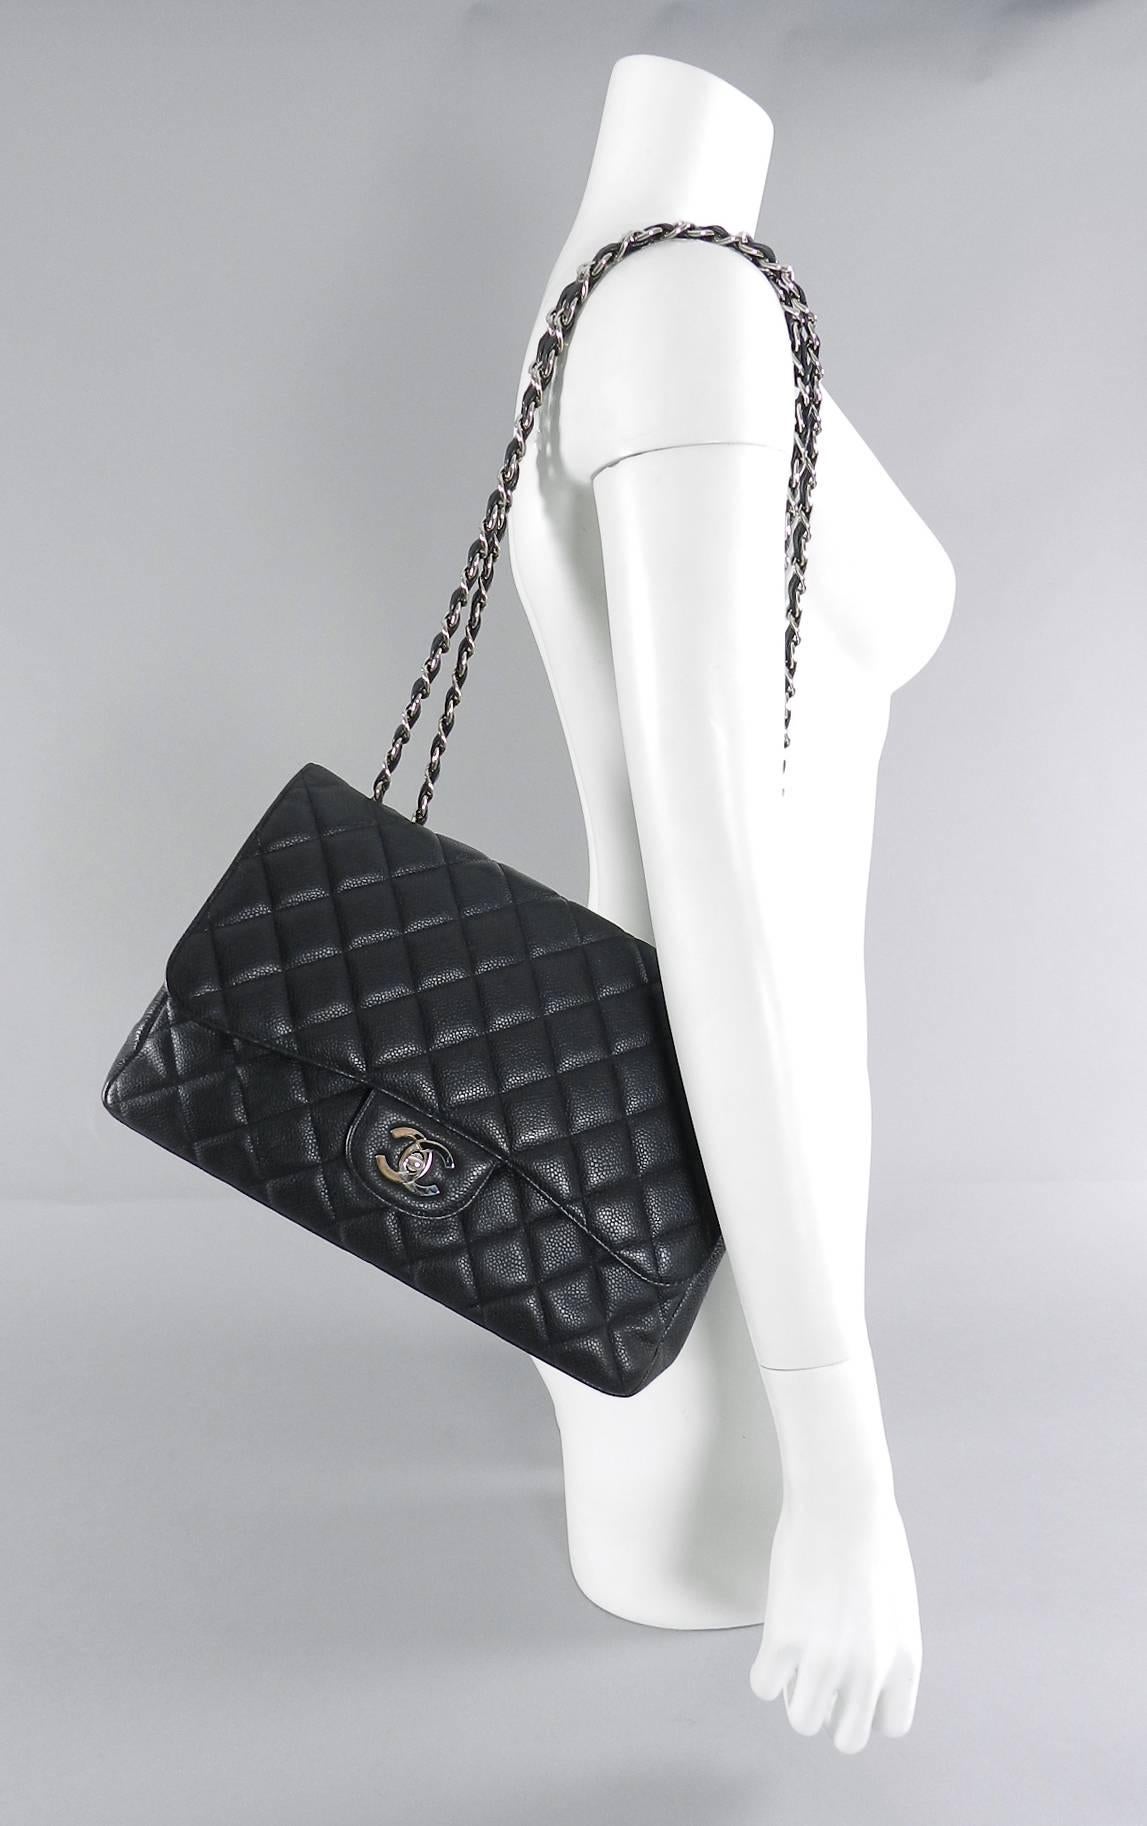 Chanel Caviar leather single flap Jumbo Classic Flap Bag with silver hardware.  Date code 12 series for production year 2008-9.  Includes all papers, authenticity card, duster, and box, and ribbon. Excellent pre-owned. Body of bag measures 30 x 20 x